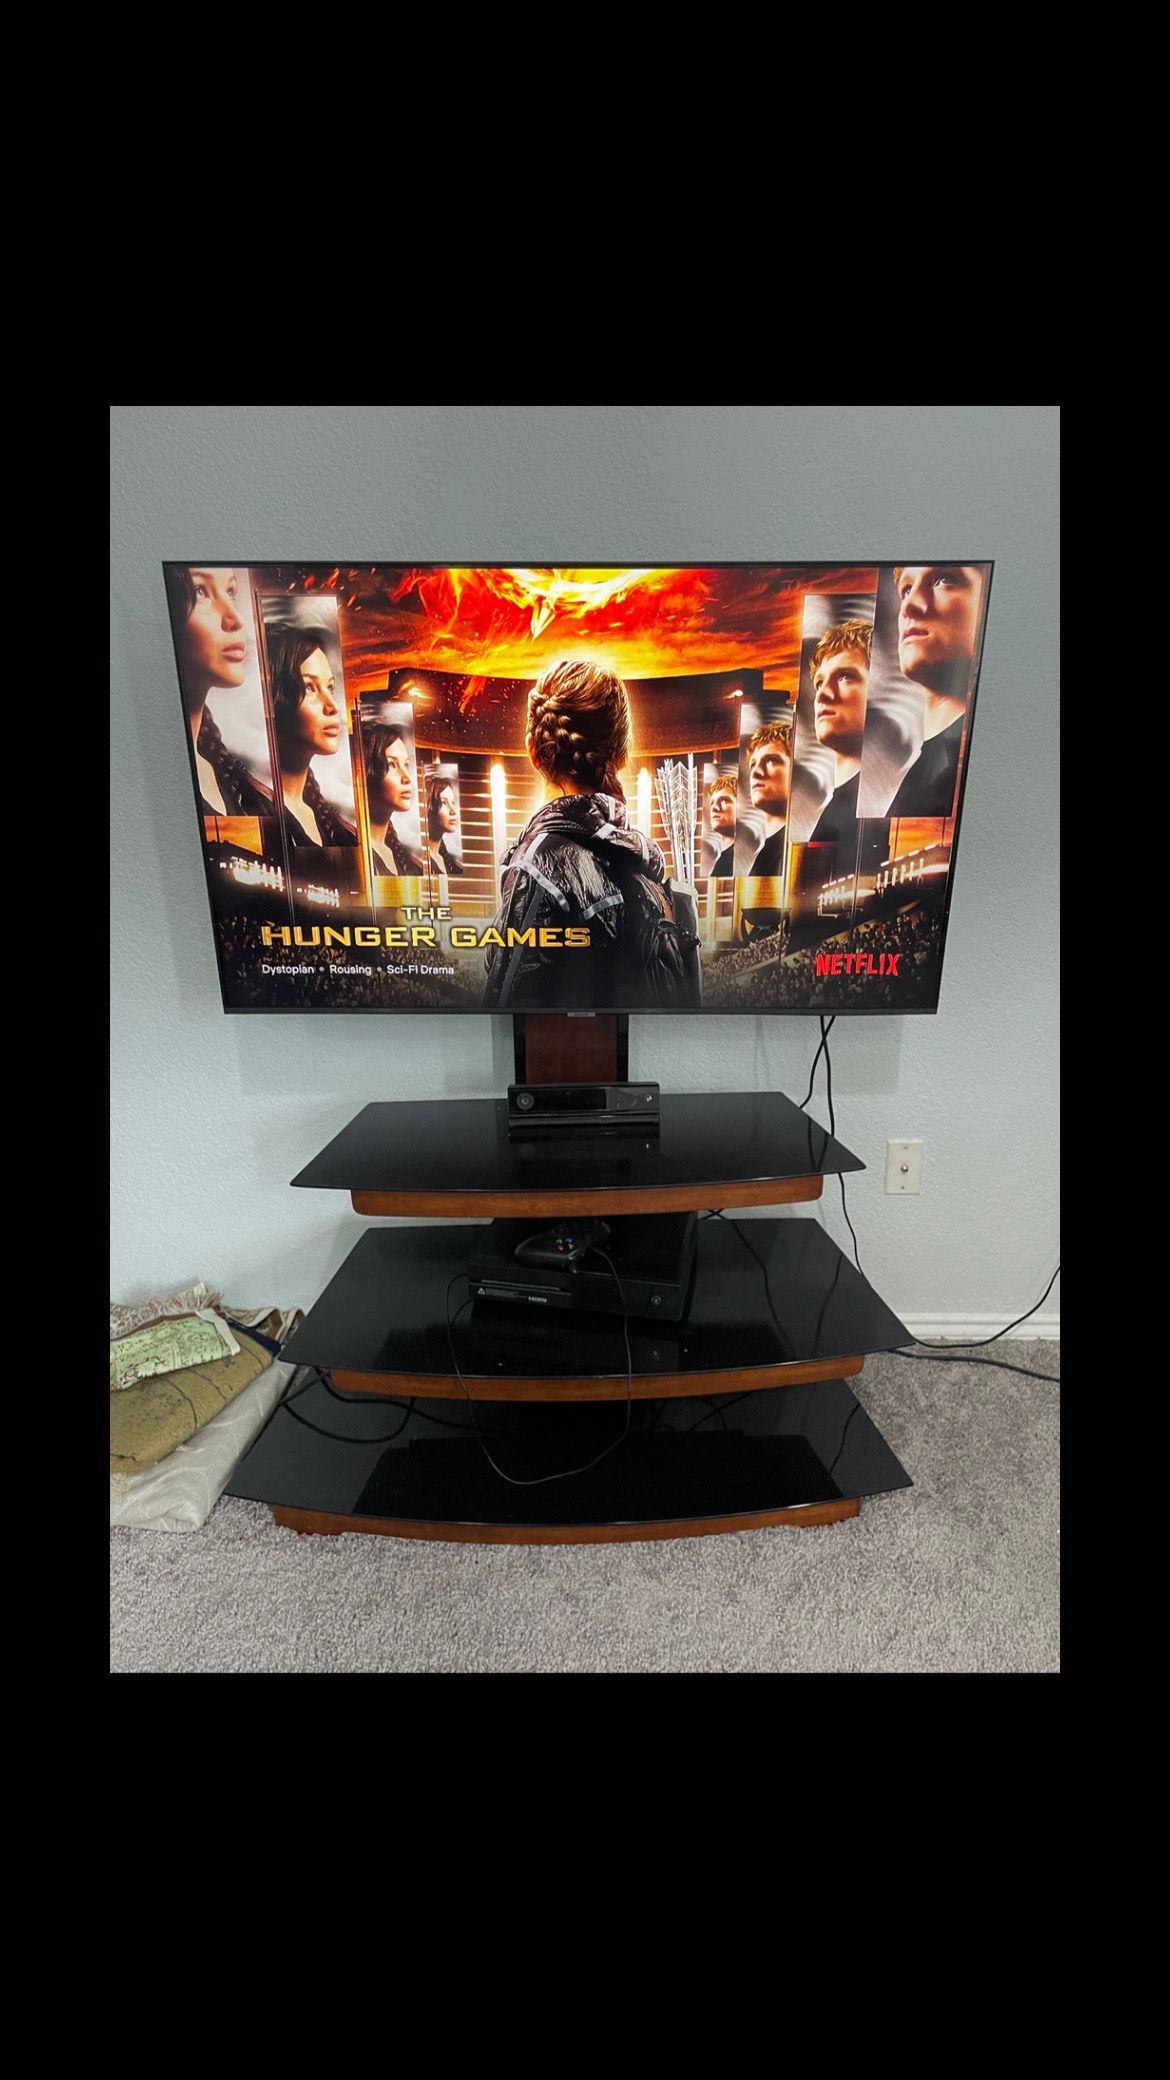 50’’ SAMSUNG SMART TV WITH STAND